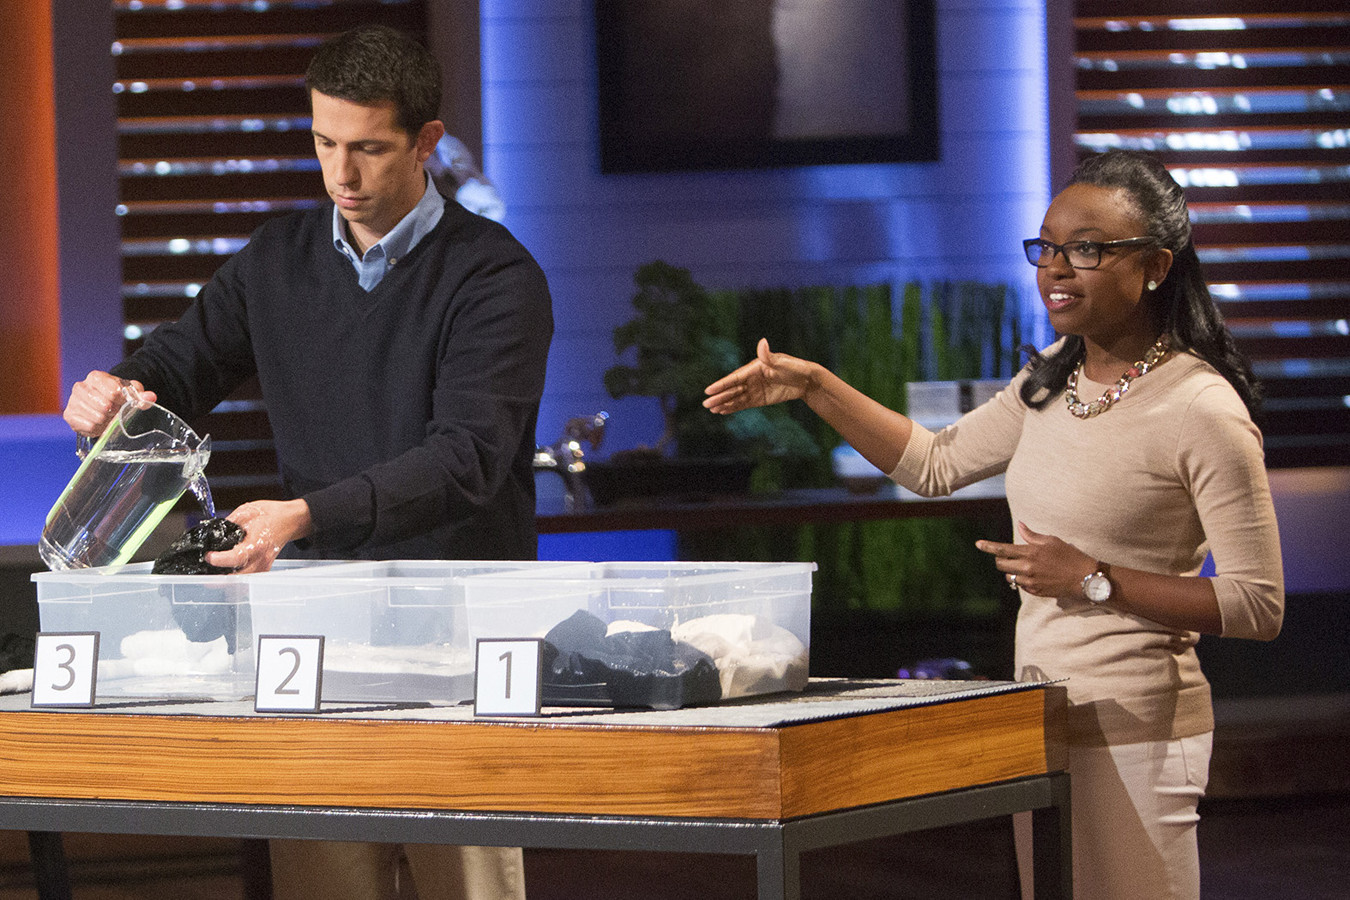 Desirée Davis Stolar, right, talks to the Sharks on Shark tank while a man next to her pours water onto clothing